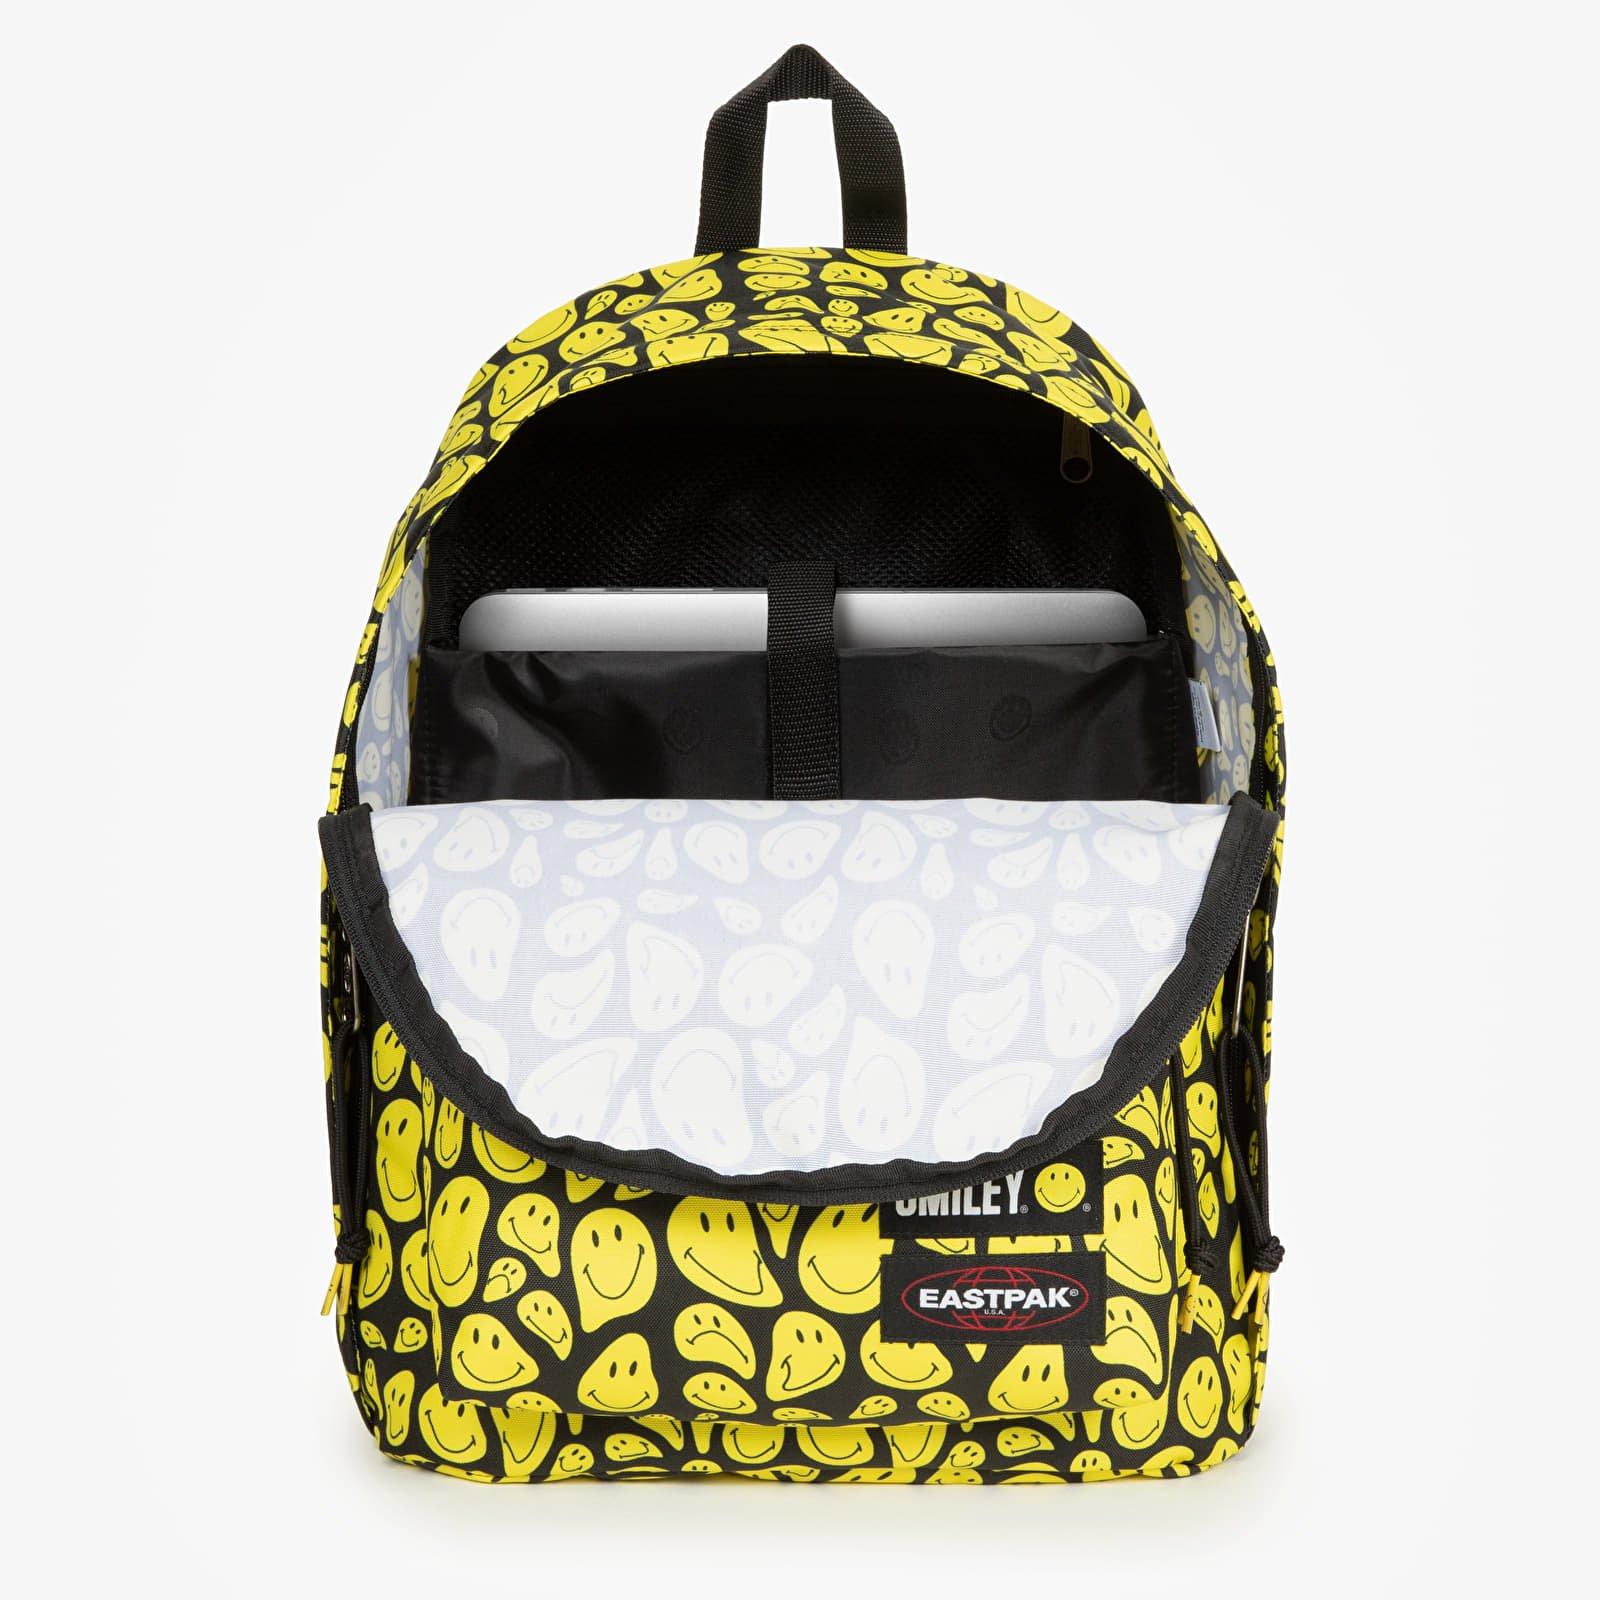 Vertolking Hassy Maryanne Jones Eastpak Out Of Office Backpack Smiley Stretch Yellow in Black | Lyst